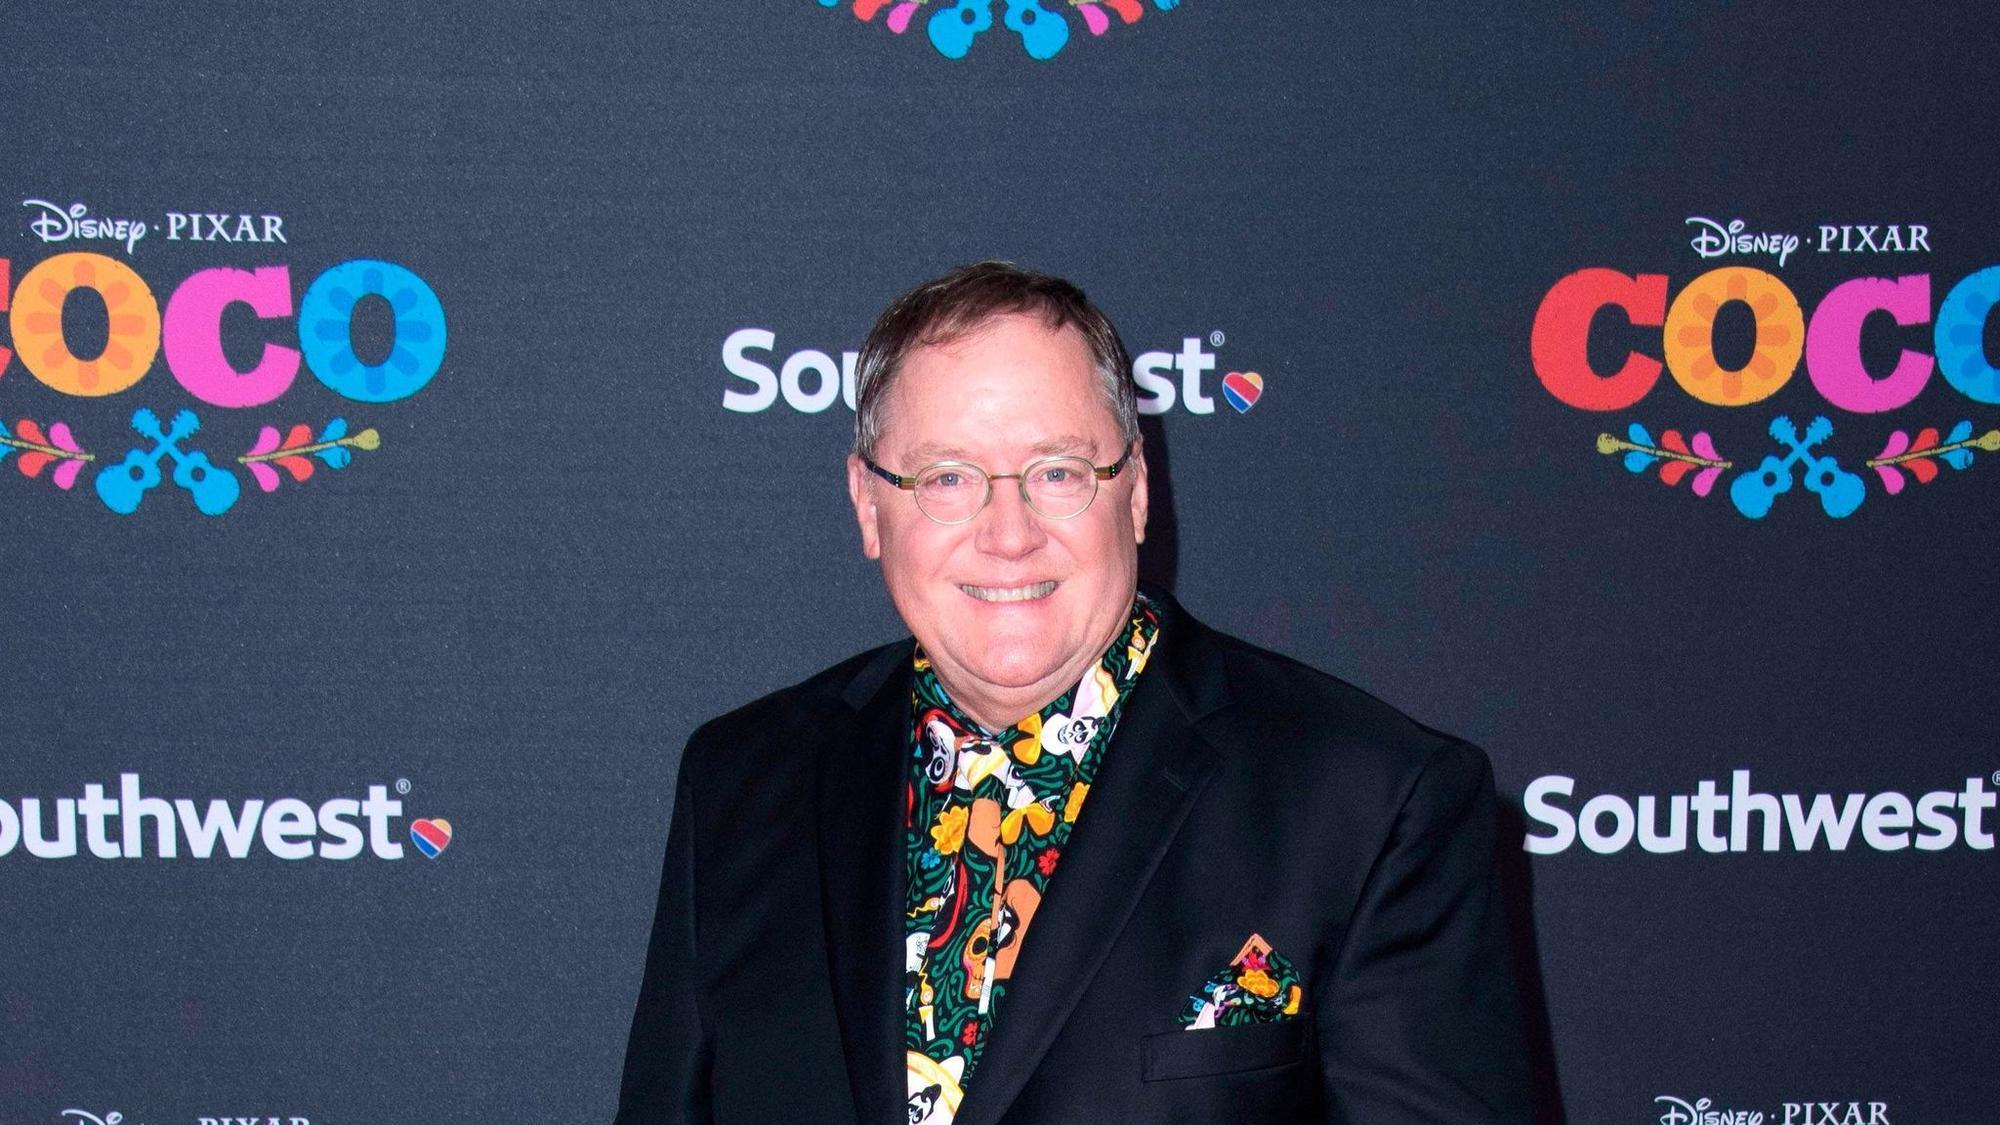 Disney, Pixar Animation executive John Lasseter to take a leave of absence, citing 'missteps'